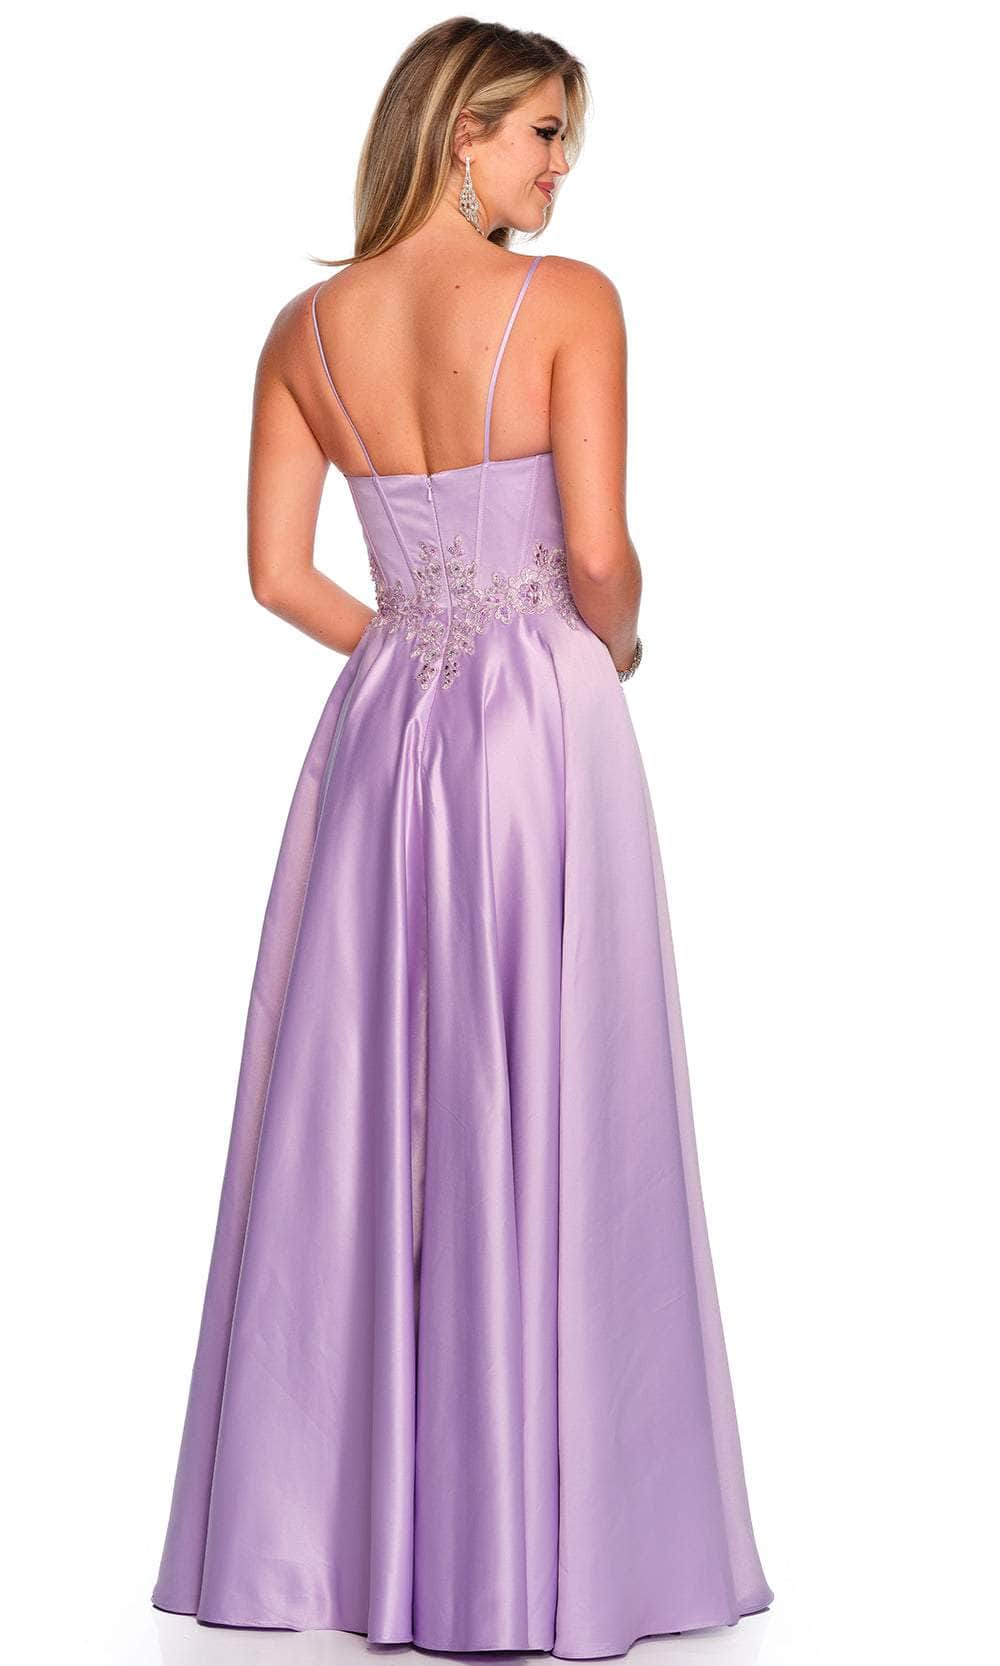 Dave & Johnny 11338 - Spaghetti Strap Satin Prom Gown Special Occasion Dress